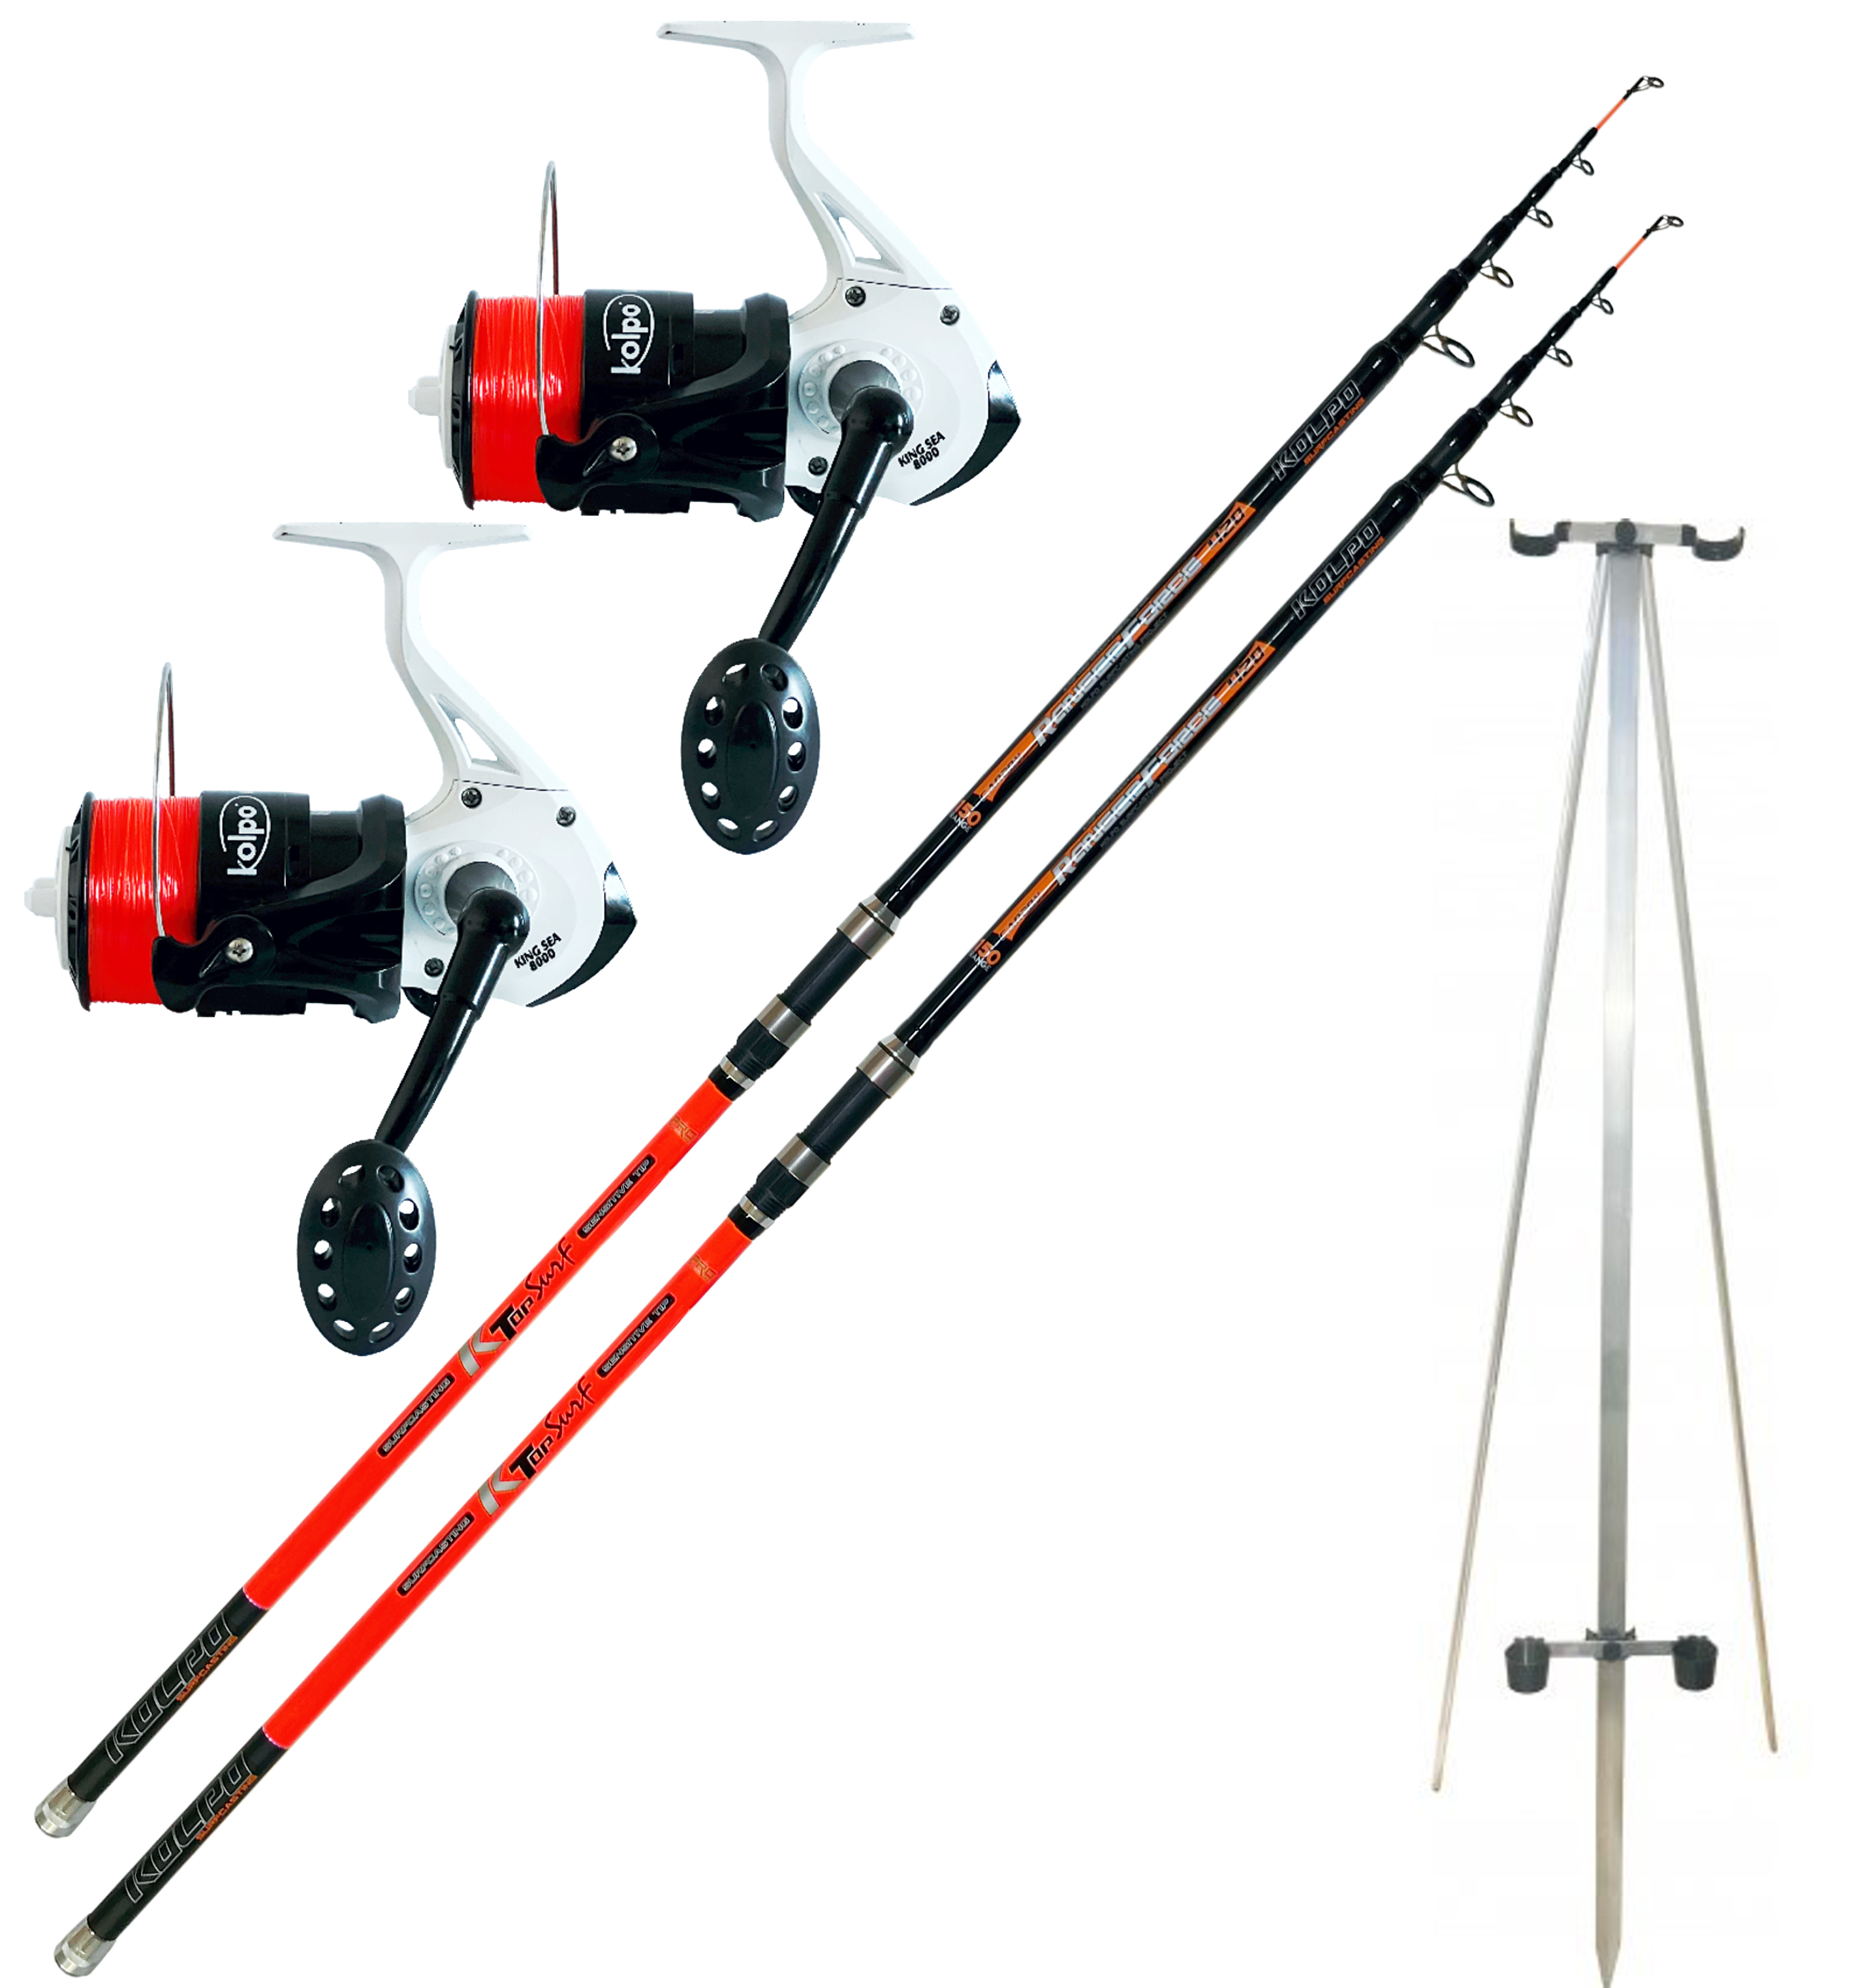 Combo Surfcasting 2 Rods 2 Tripod Reels for Fishing from the Beach